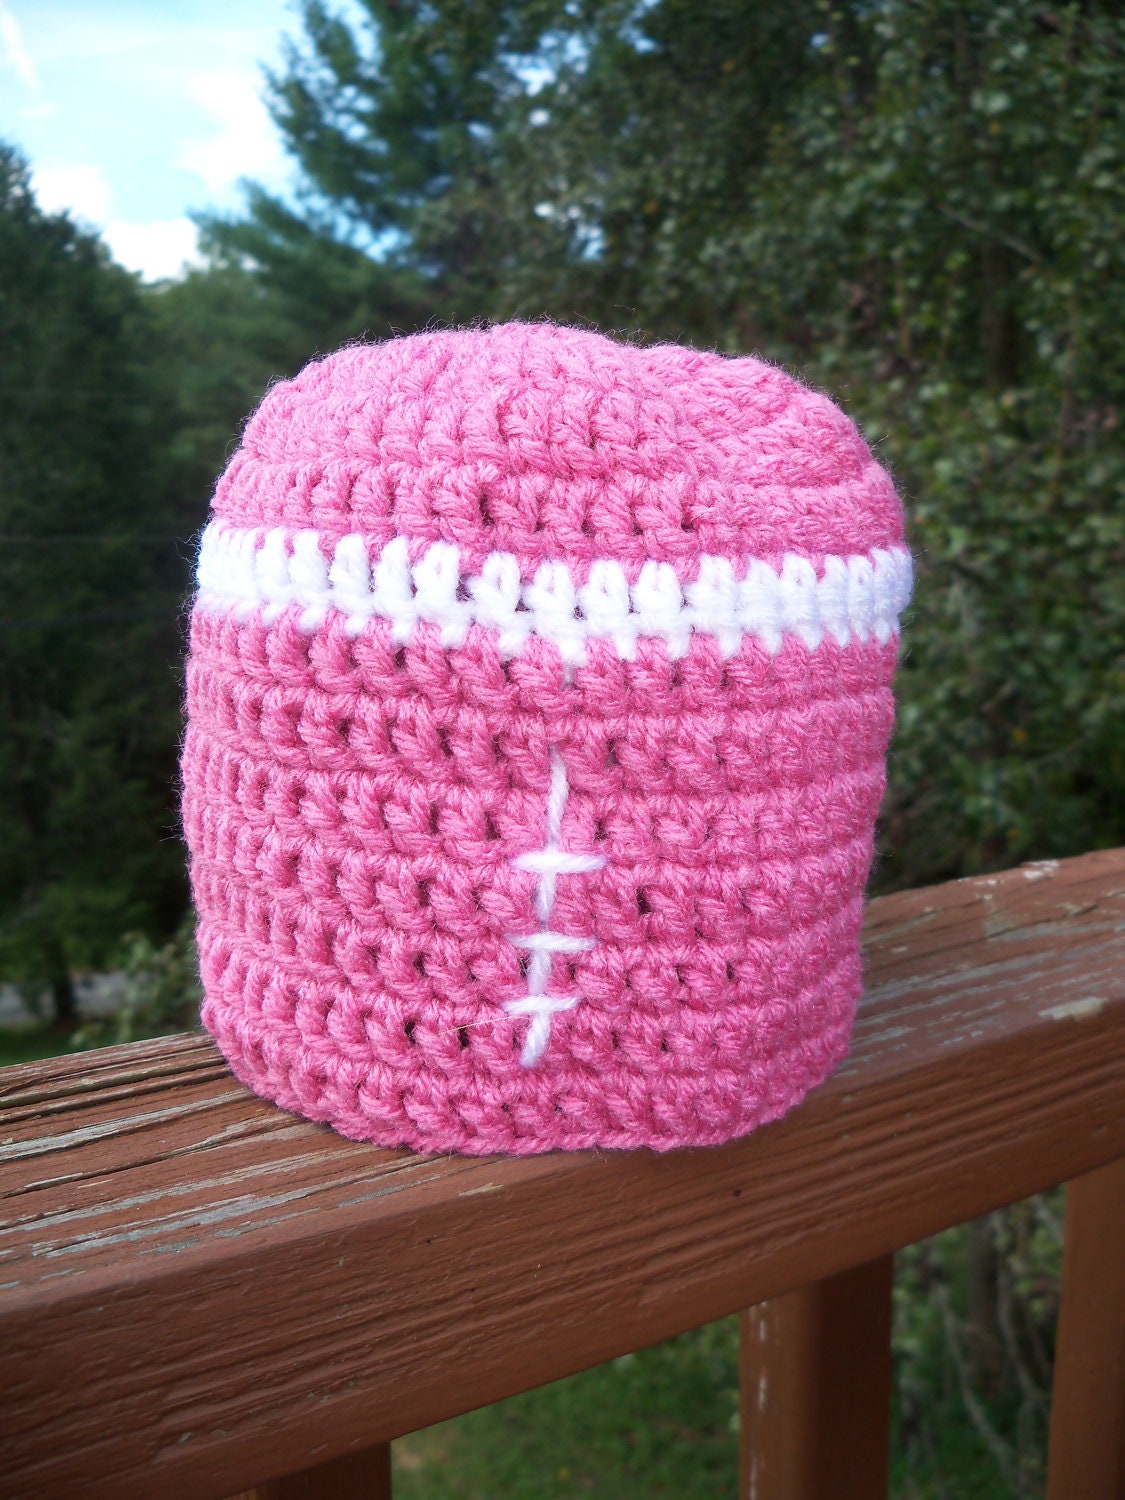 Crocheted Girlie Football Baby Hat - Pink - Size 6 months